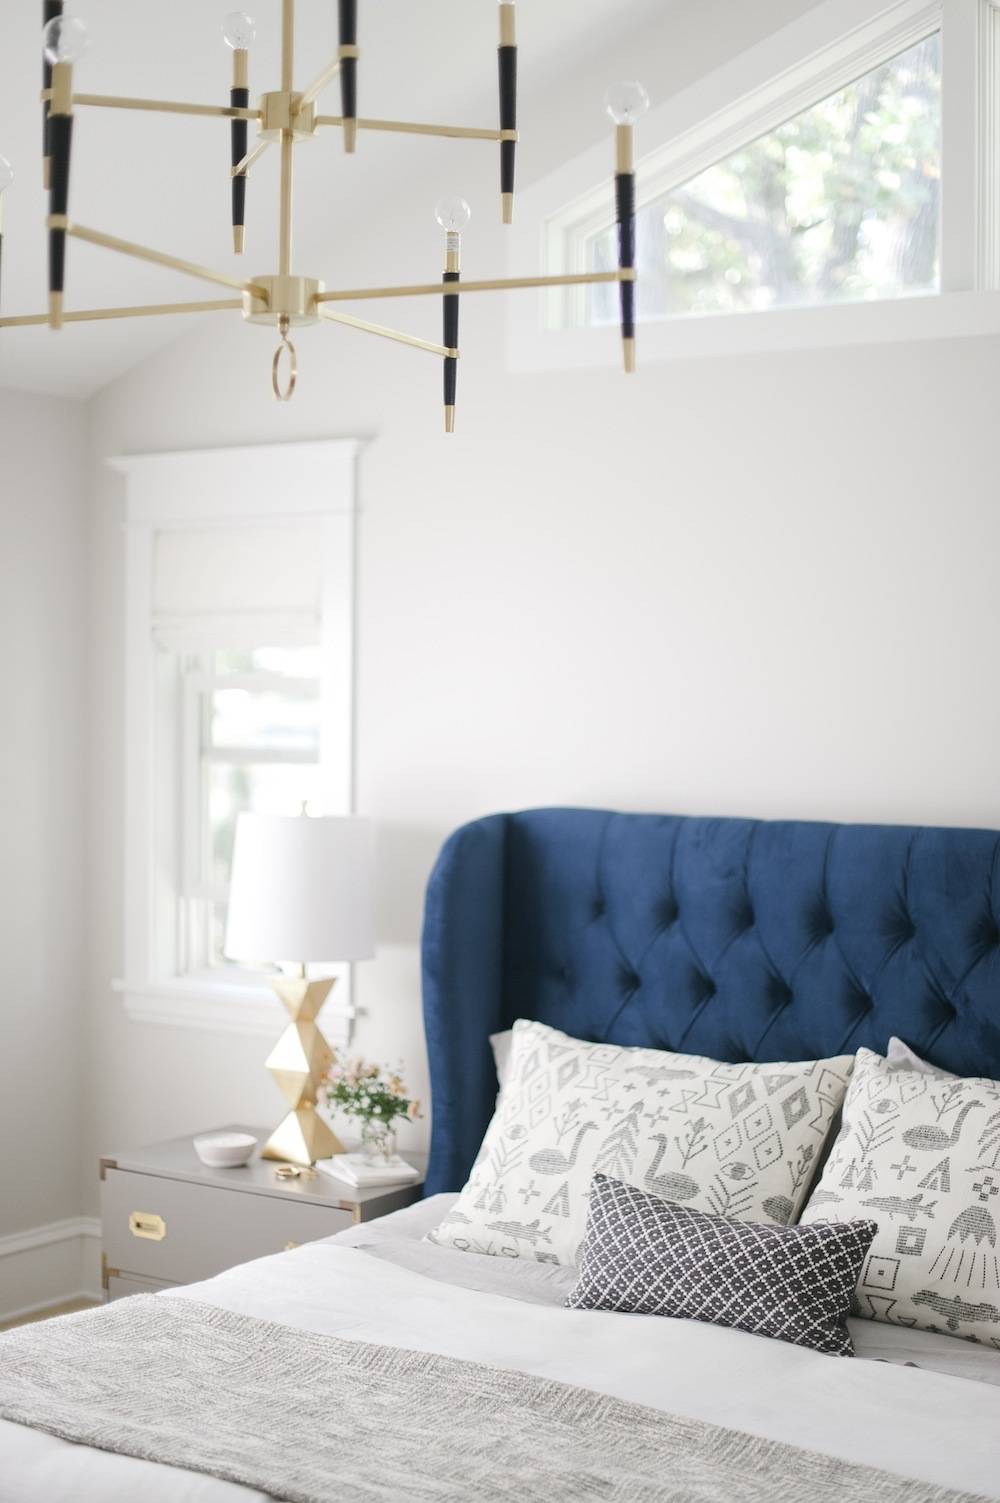 A bed with a blue material headboard sits in a white bedroom.